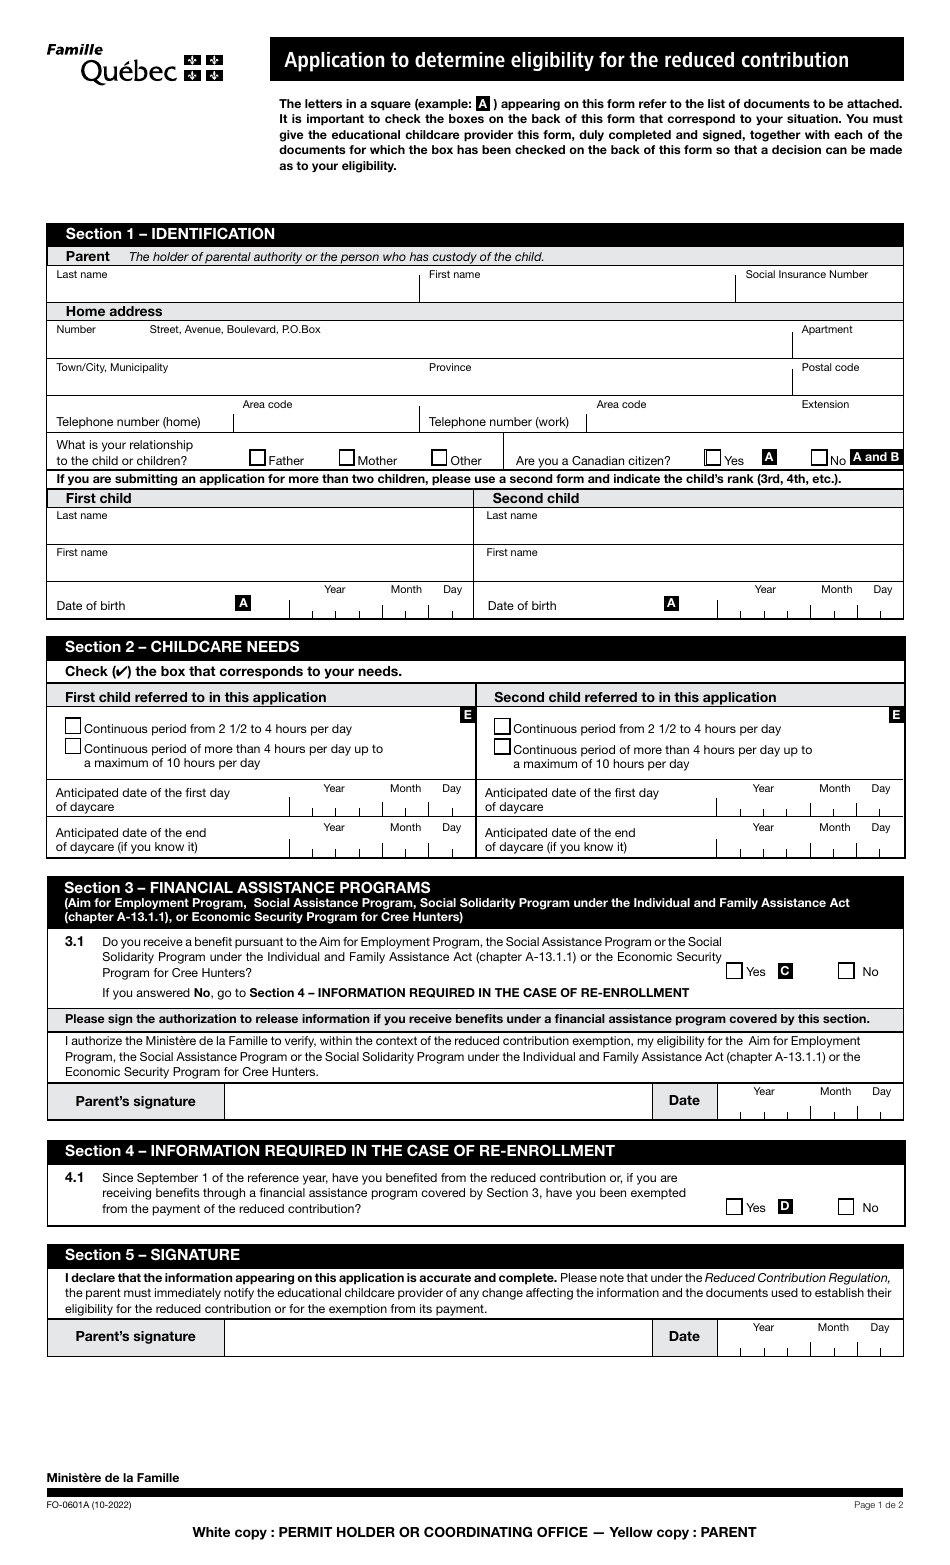 Form FO-0601A Application to Determine Eligibility for the Reduced Contribution - Quebec, Canada, Page 1